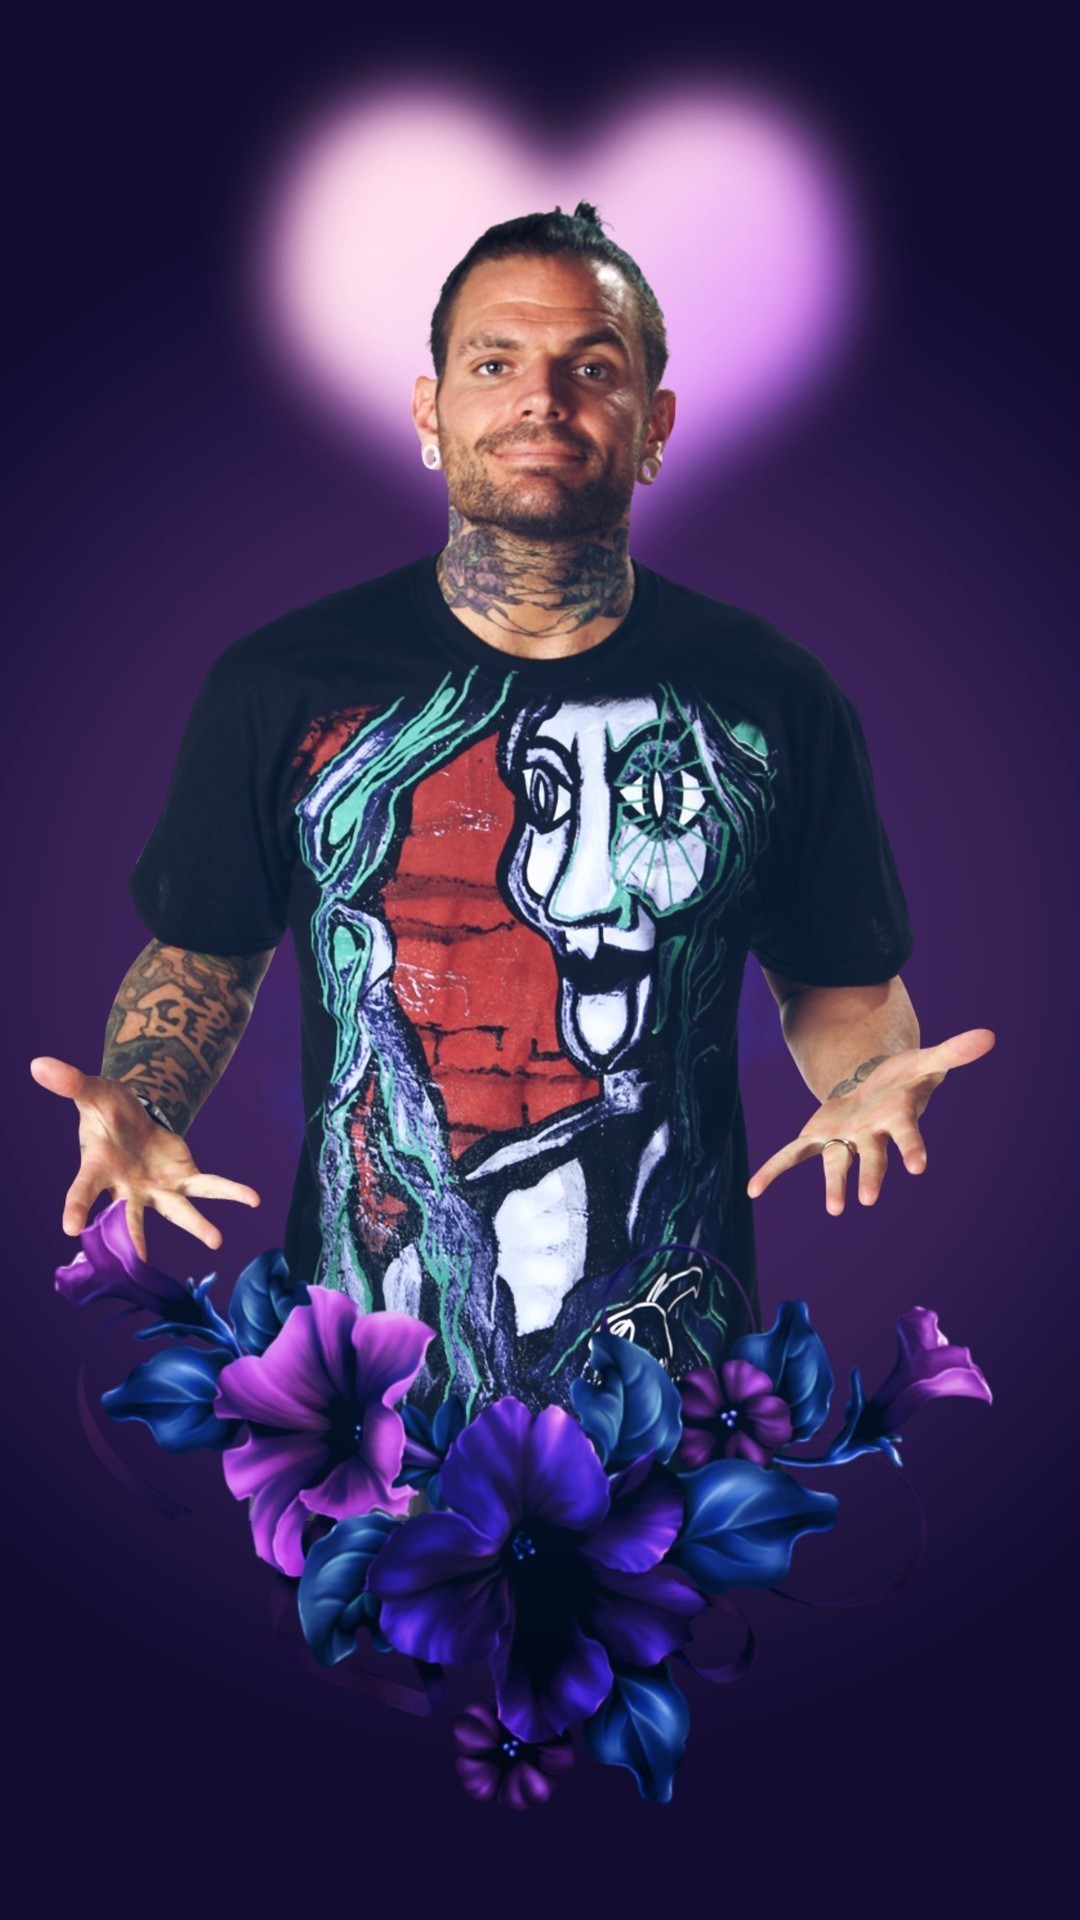 1080x1920 1920x1080 Jeff Hardy Images Jeff Hardy Wallpaper HD Wallpaper And  Background 1200Ã—800 Popular wallpapers for pc (47 Wallpapers) | Adorable  Wallpapers